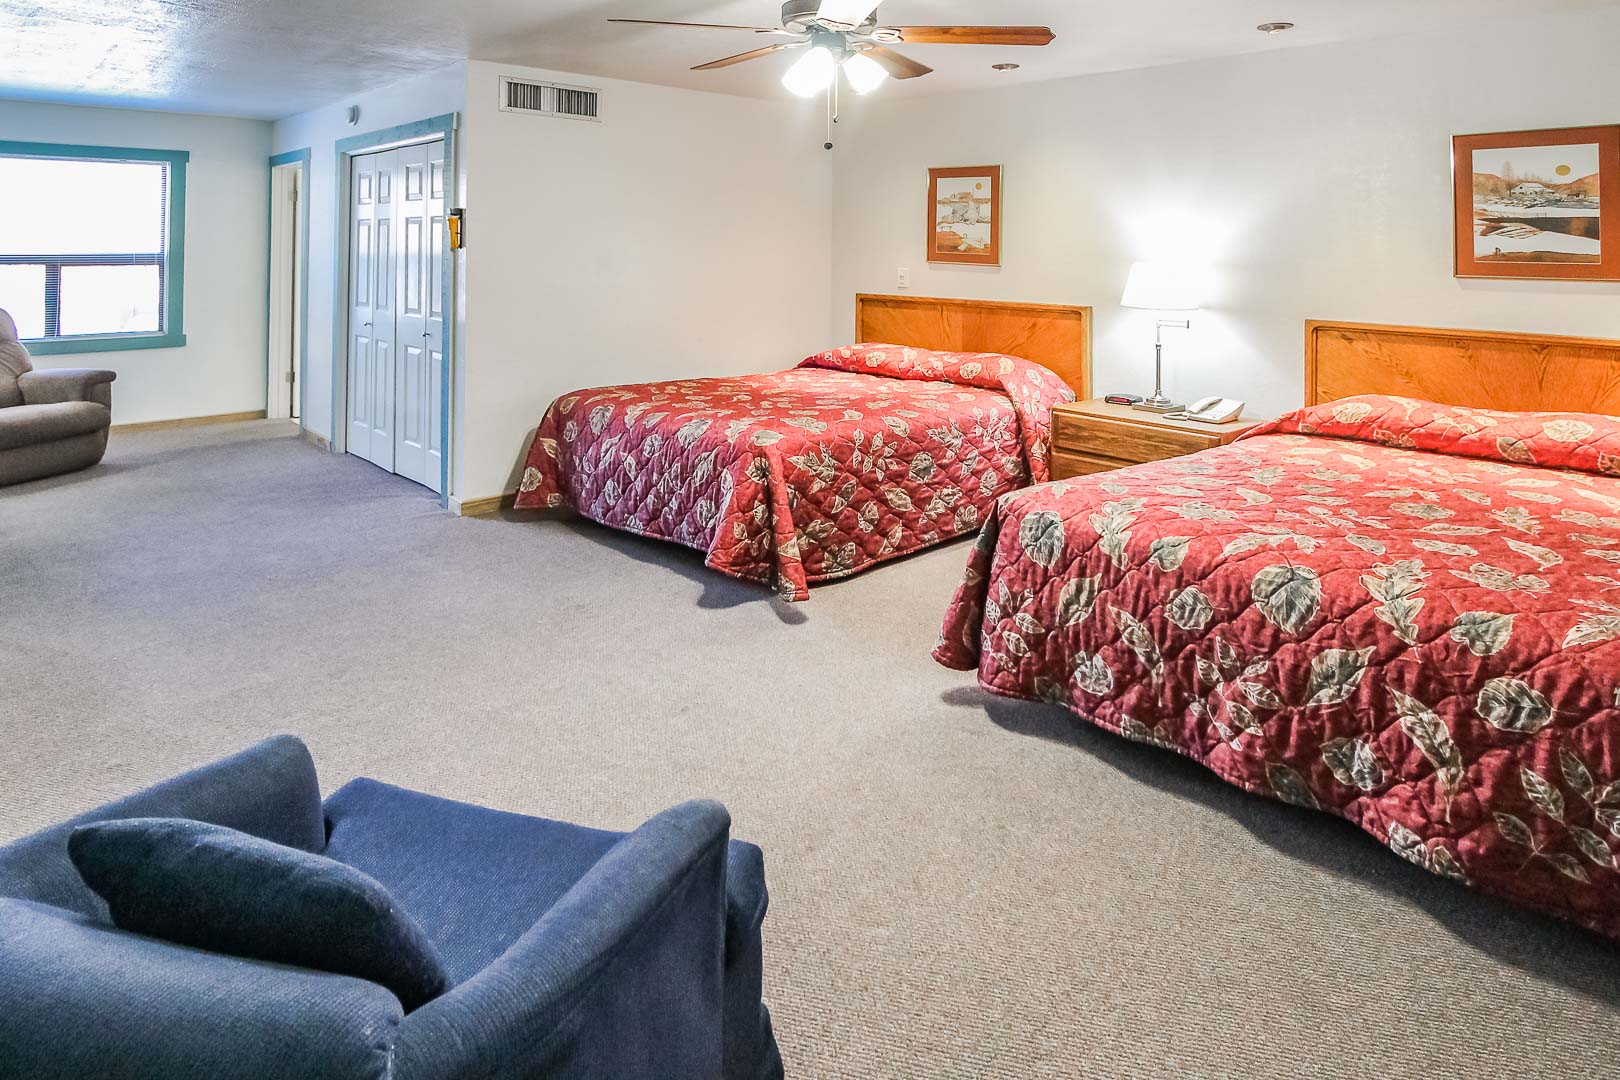 A spacious bedroom with double beds at VRI's Roundhouse Resort in Pinetop, Arizona.